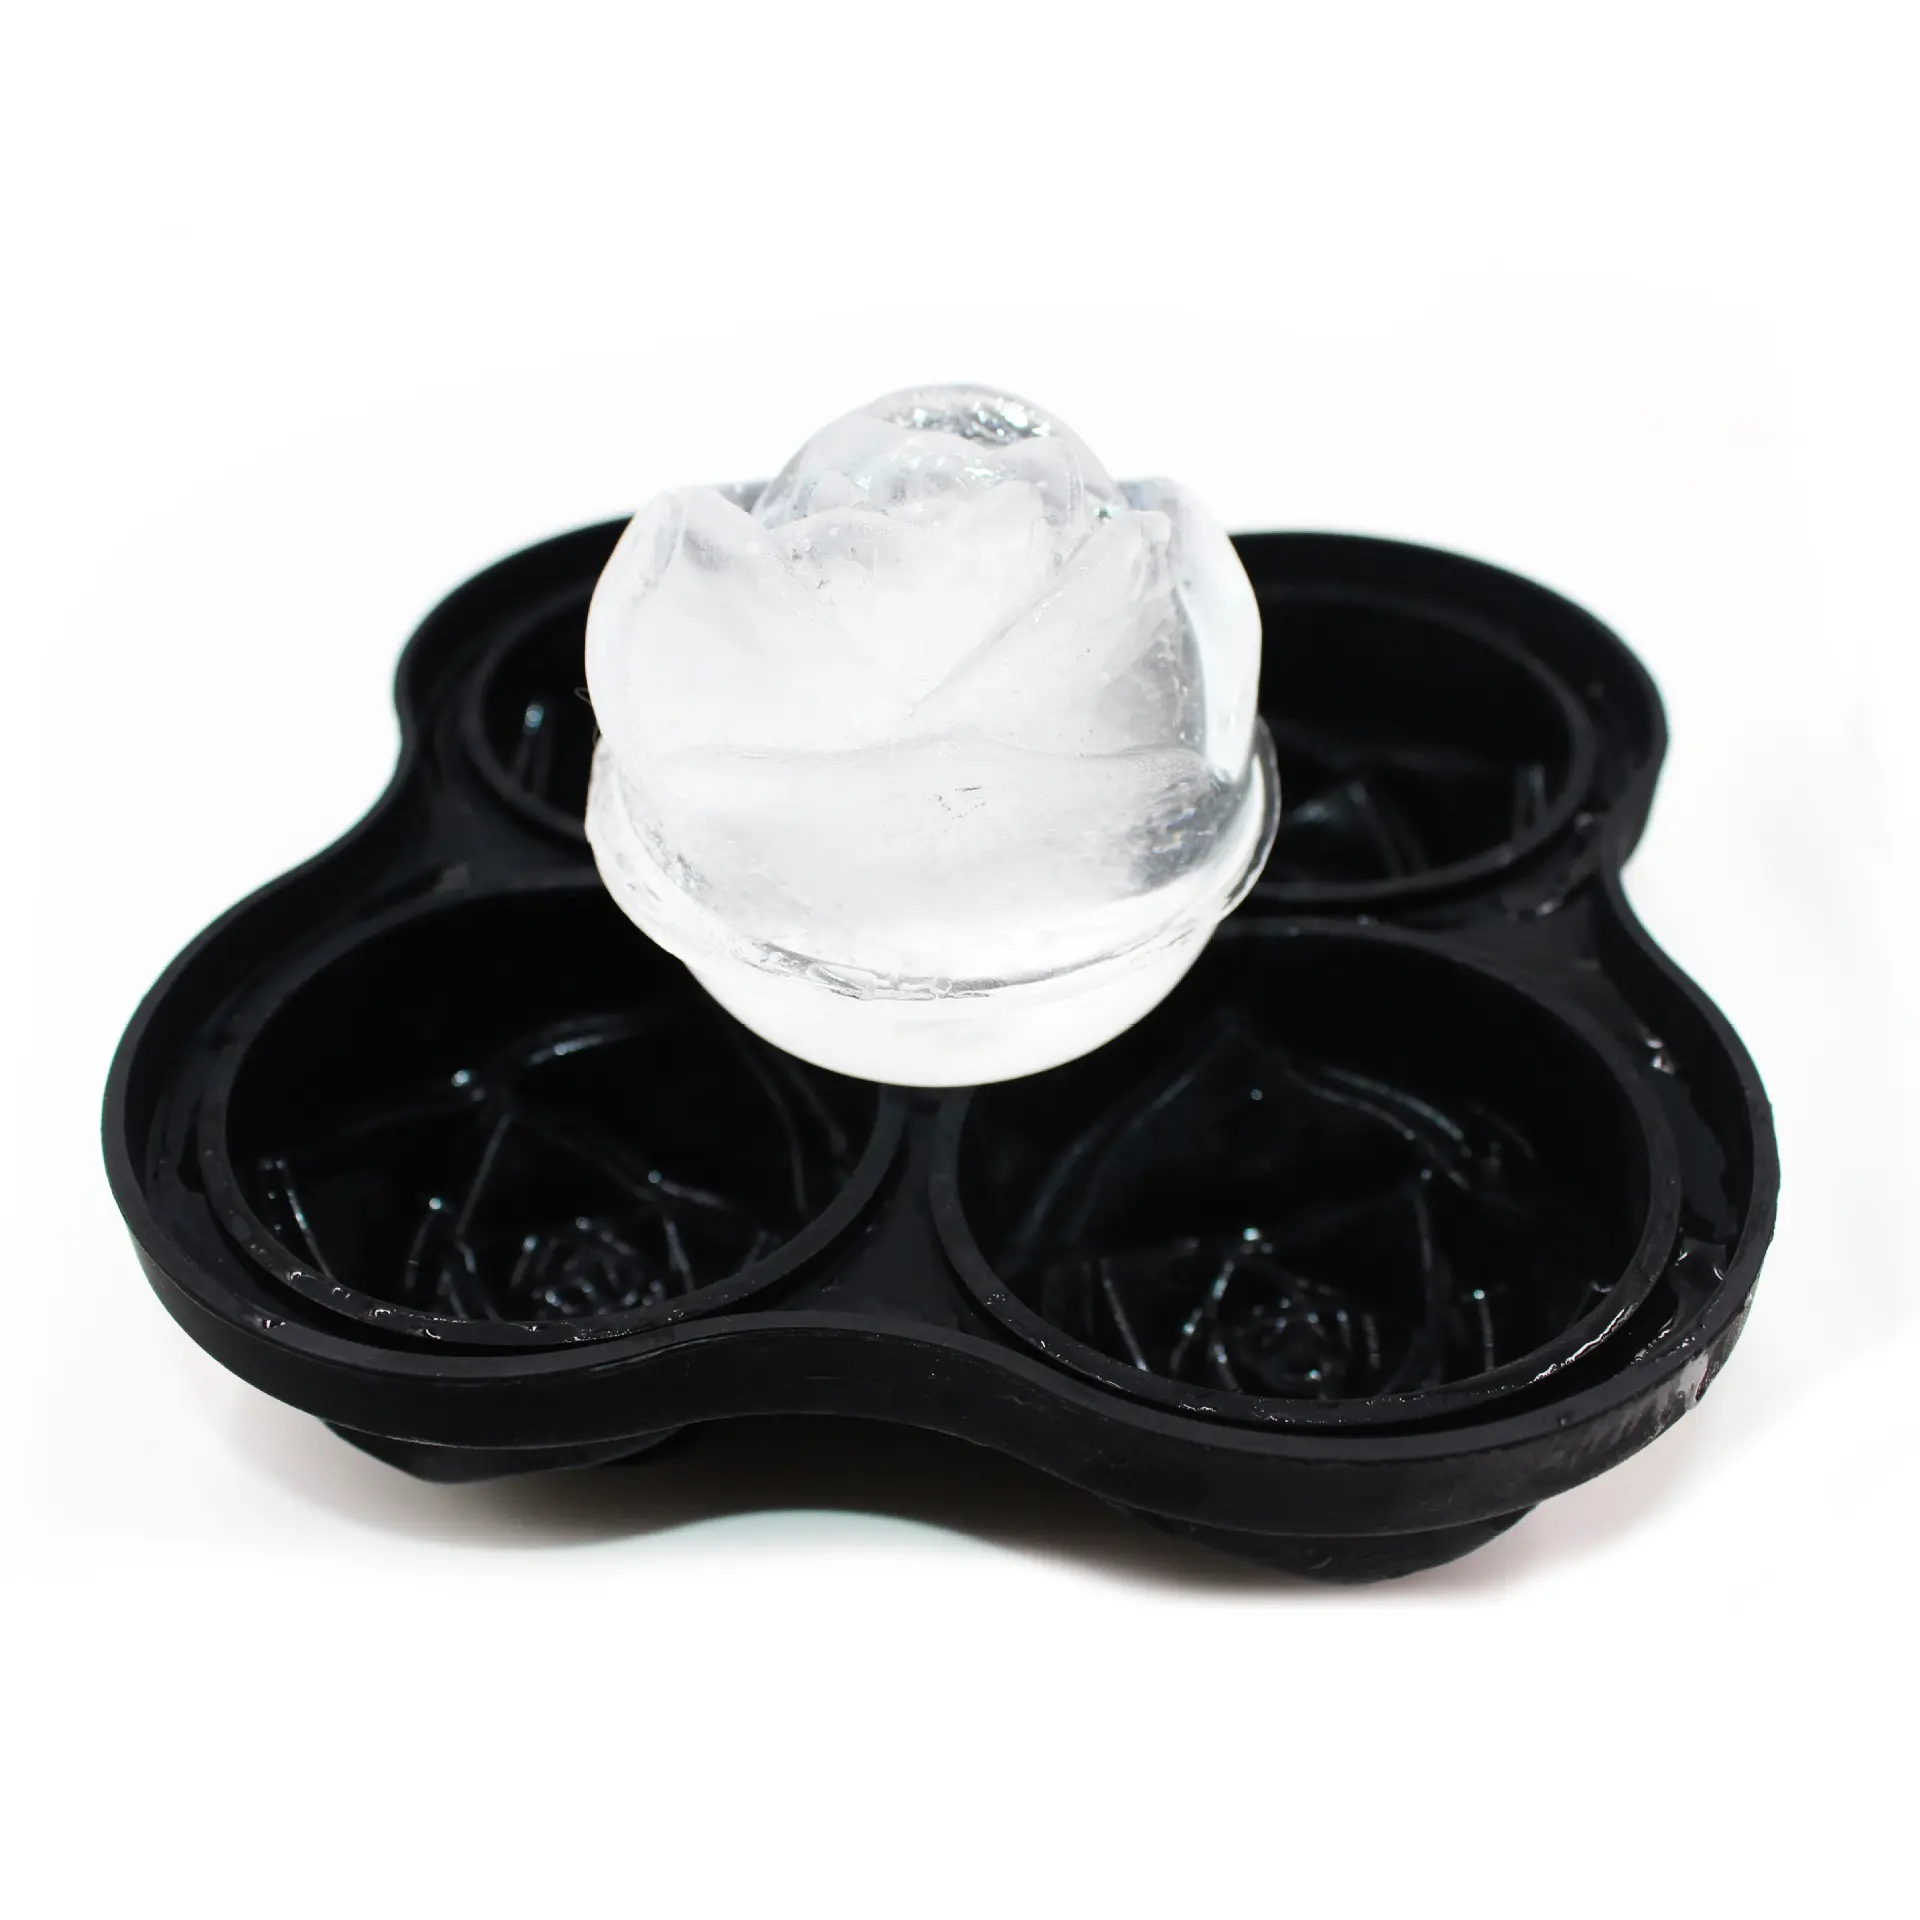 RTS Rose Ice Maker Ice Cream Mold Stocked Feature Ice Cube Trays with Removable Lids Silicone Healthy Mold Kitchen